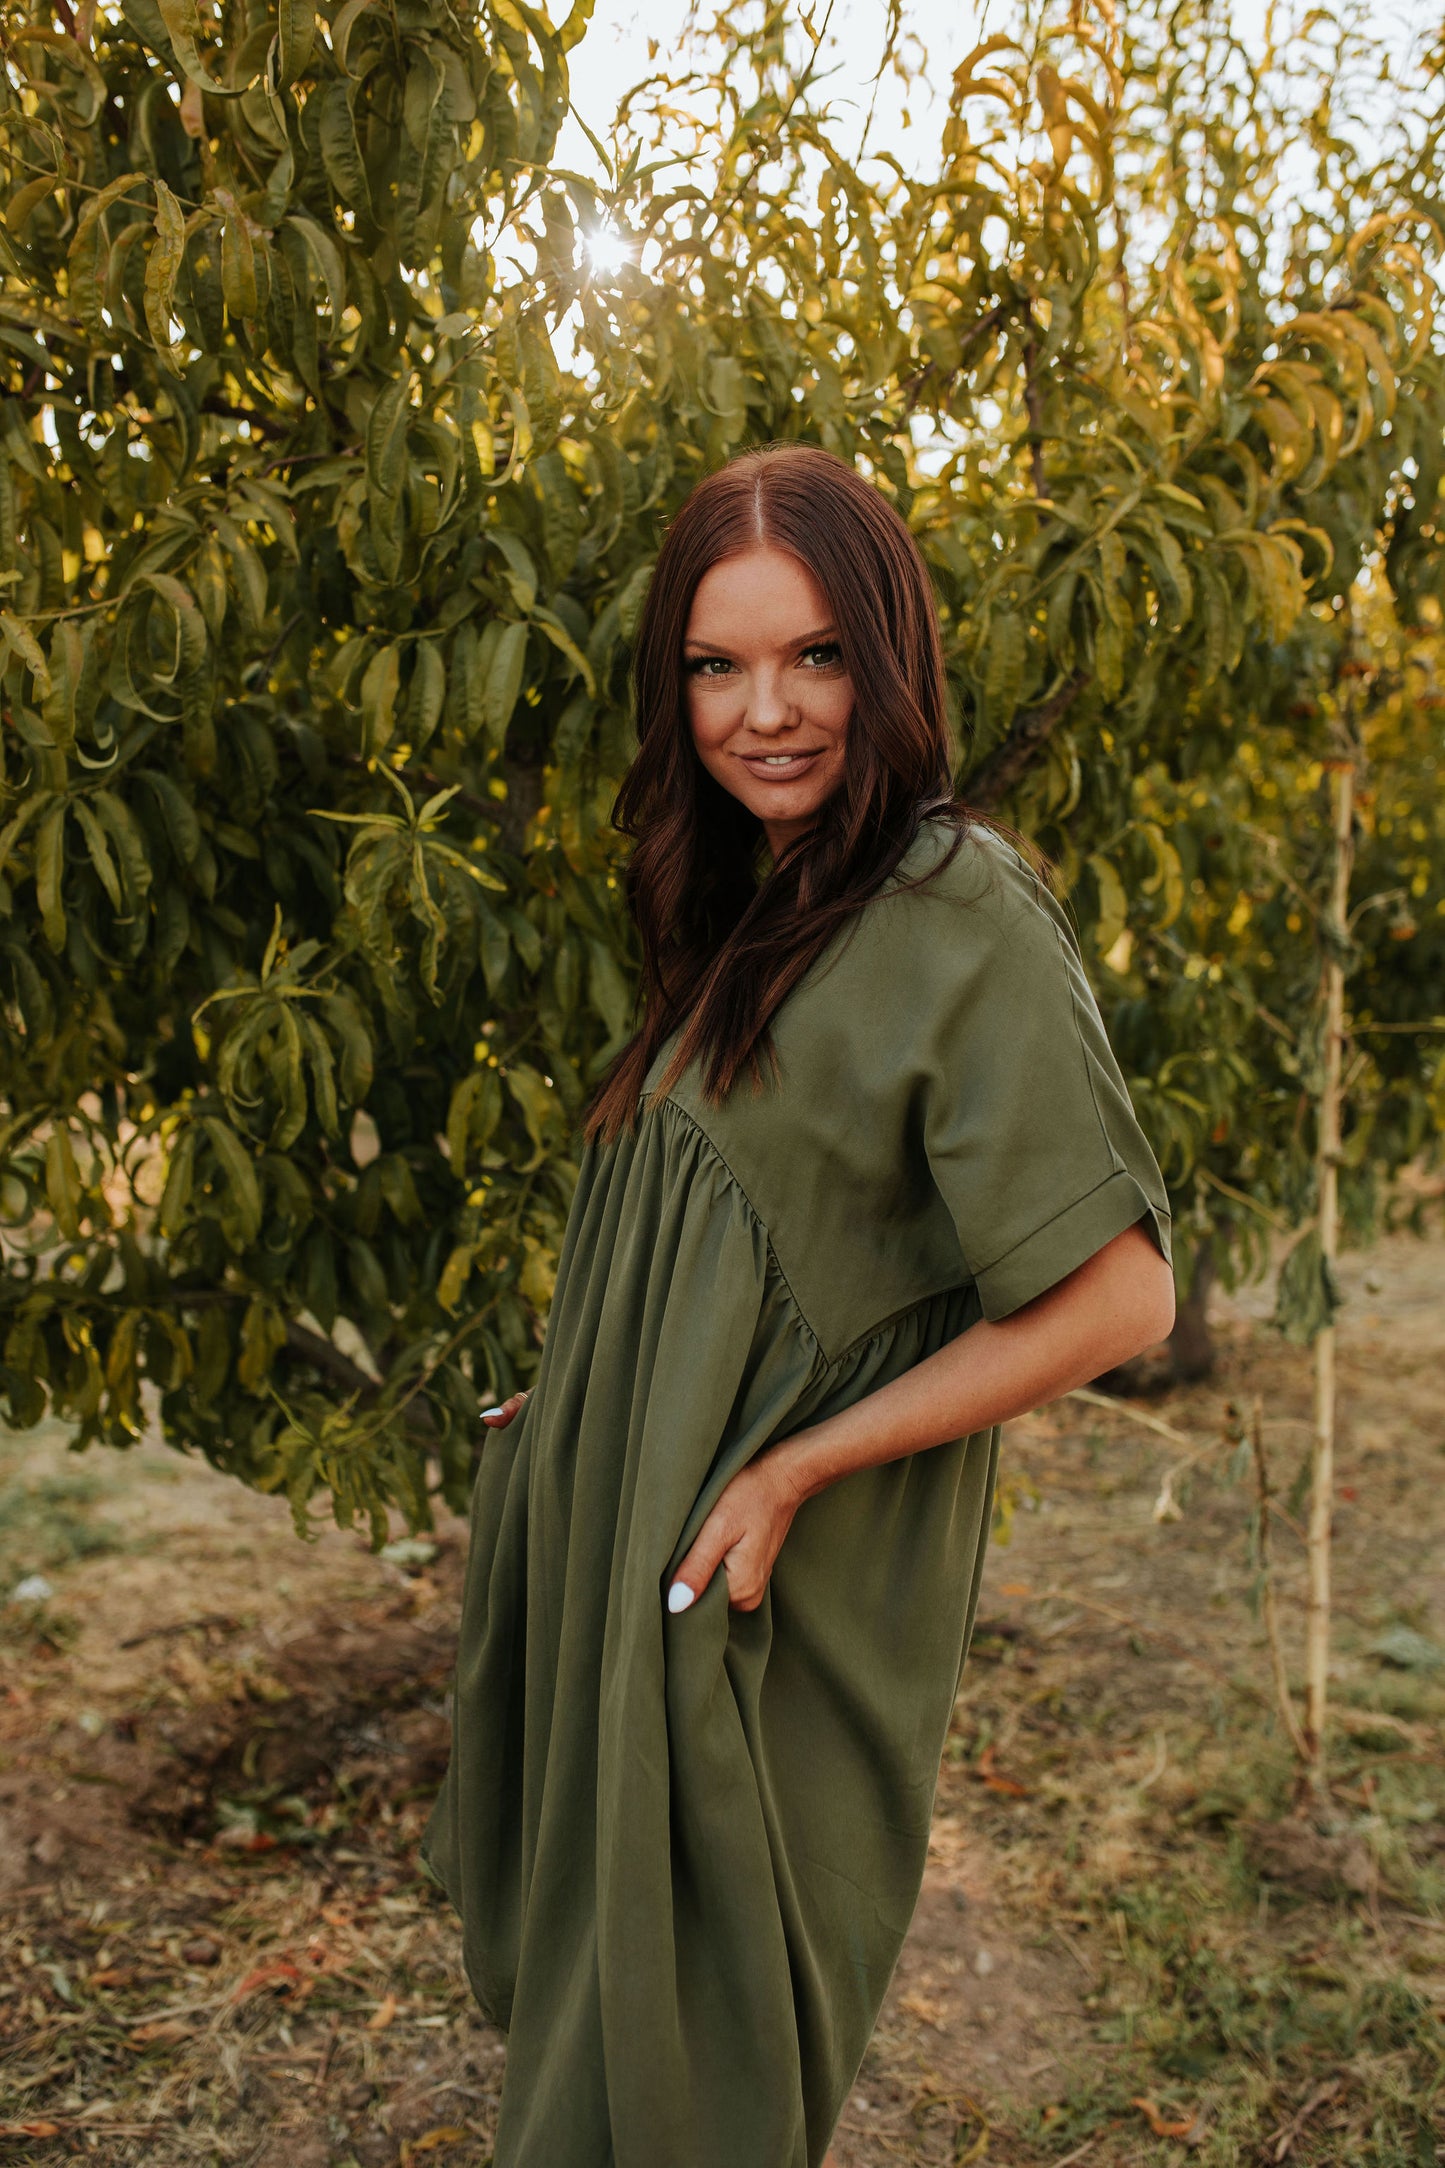 THE FALL FEELS BABYDOLL DRESS IN OLIVE